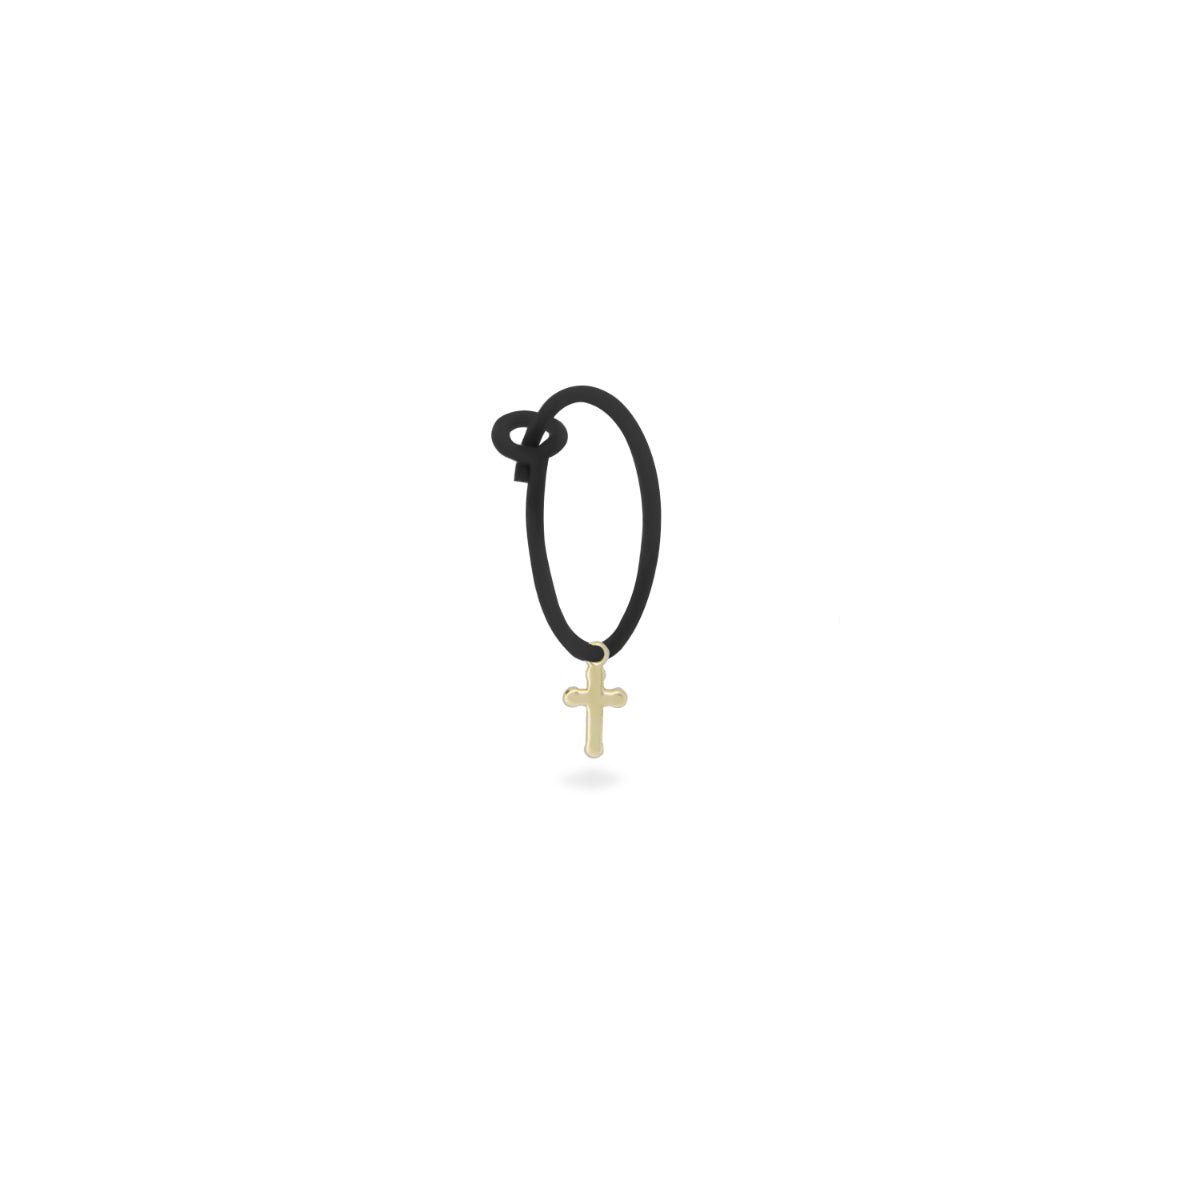 Earrings - Single earring with Cross and painted hoop - ORO18KT - 3 | Rue des Mille